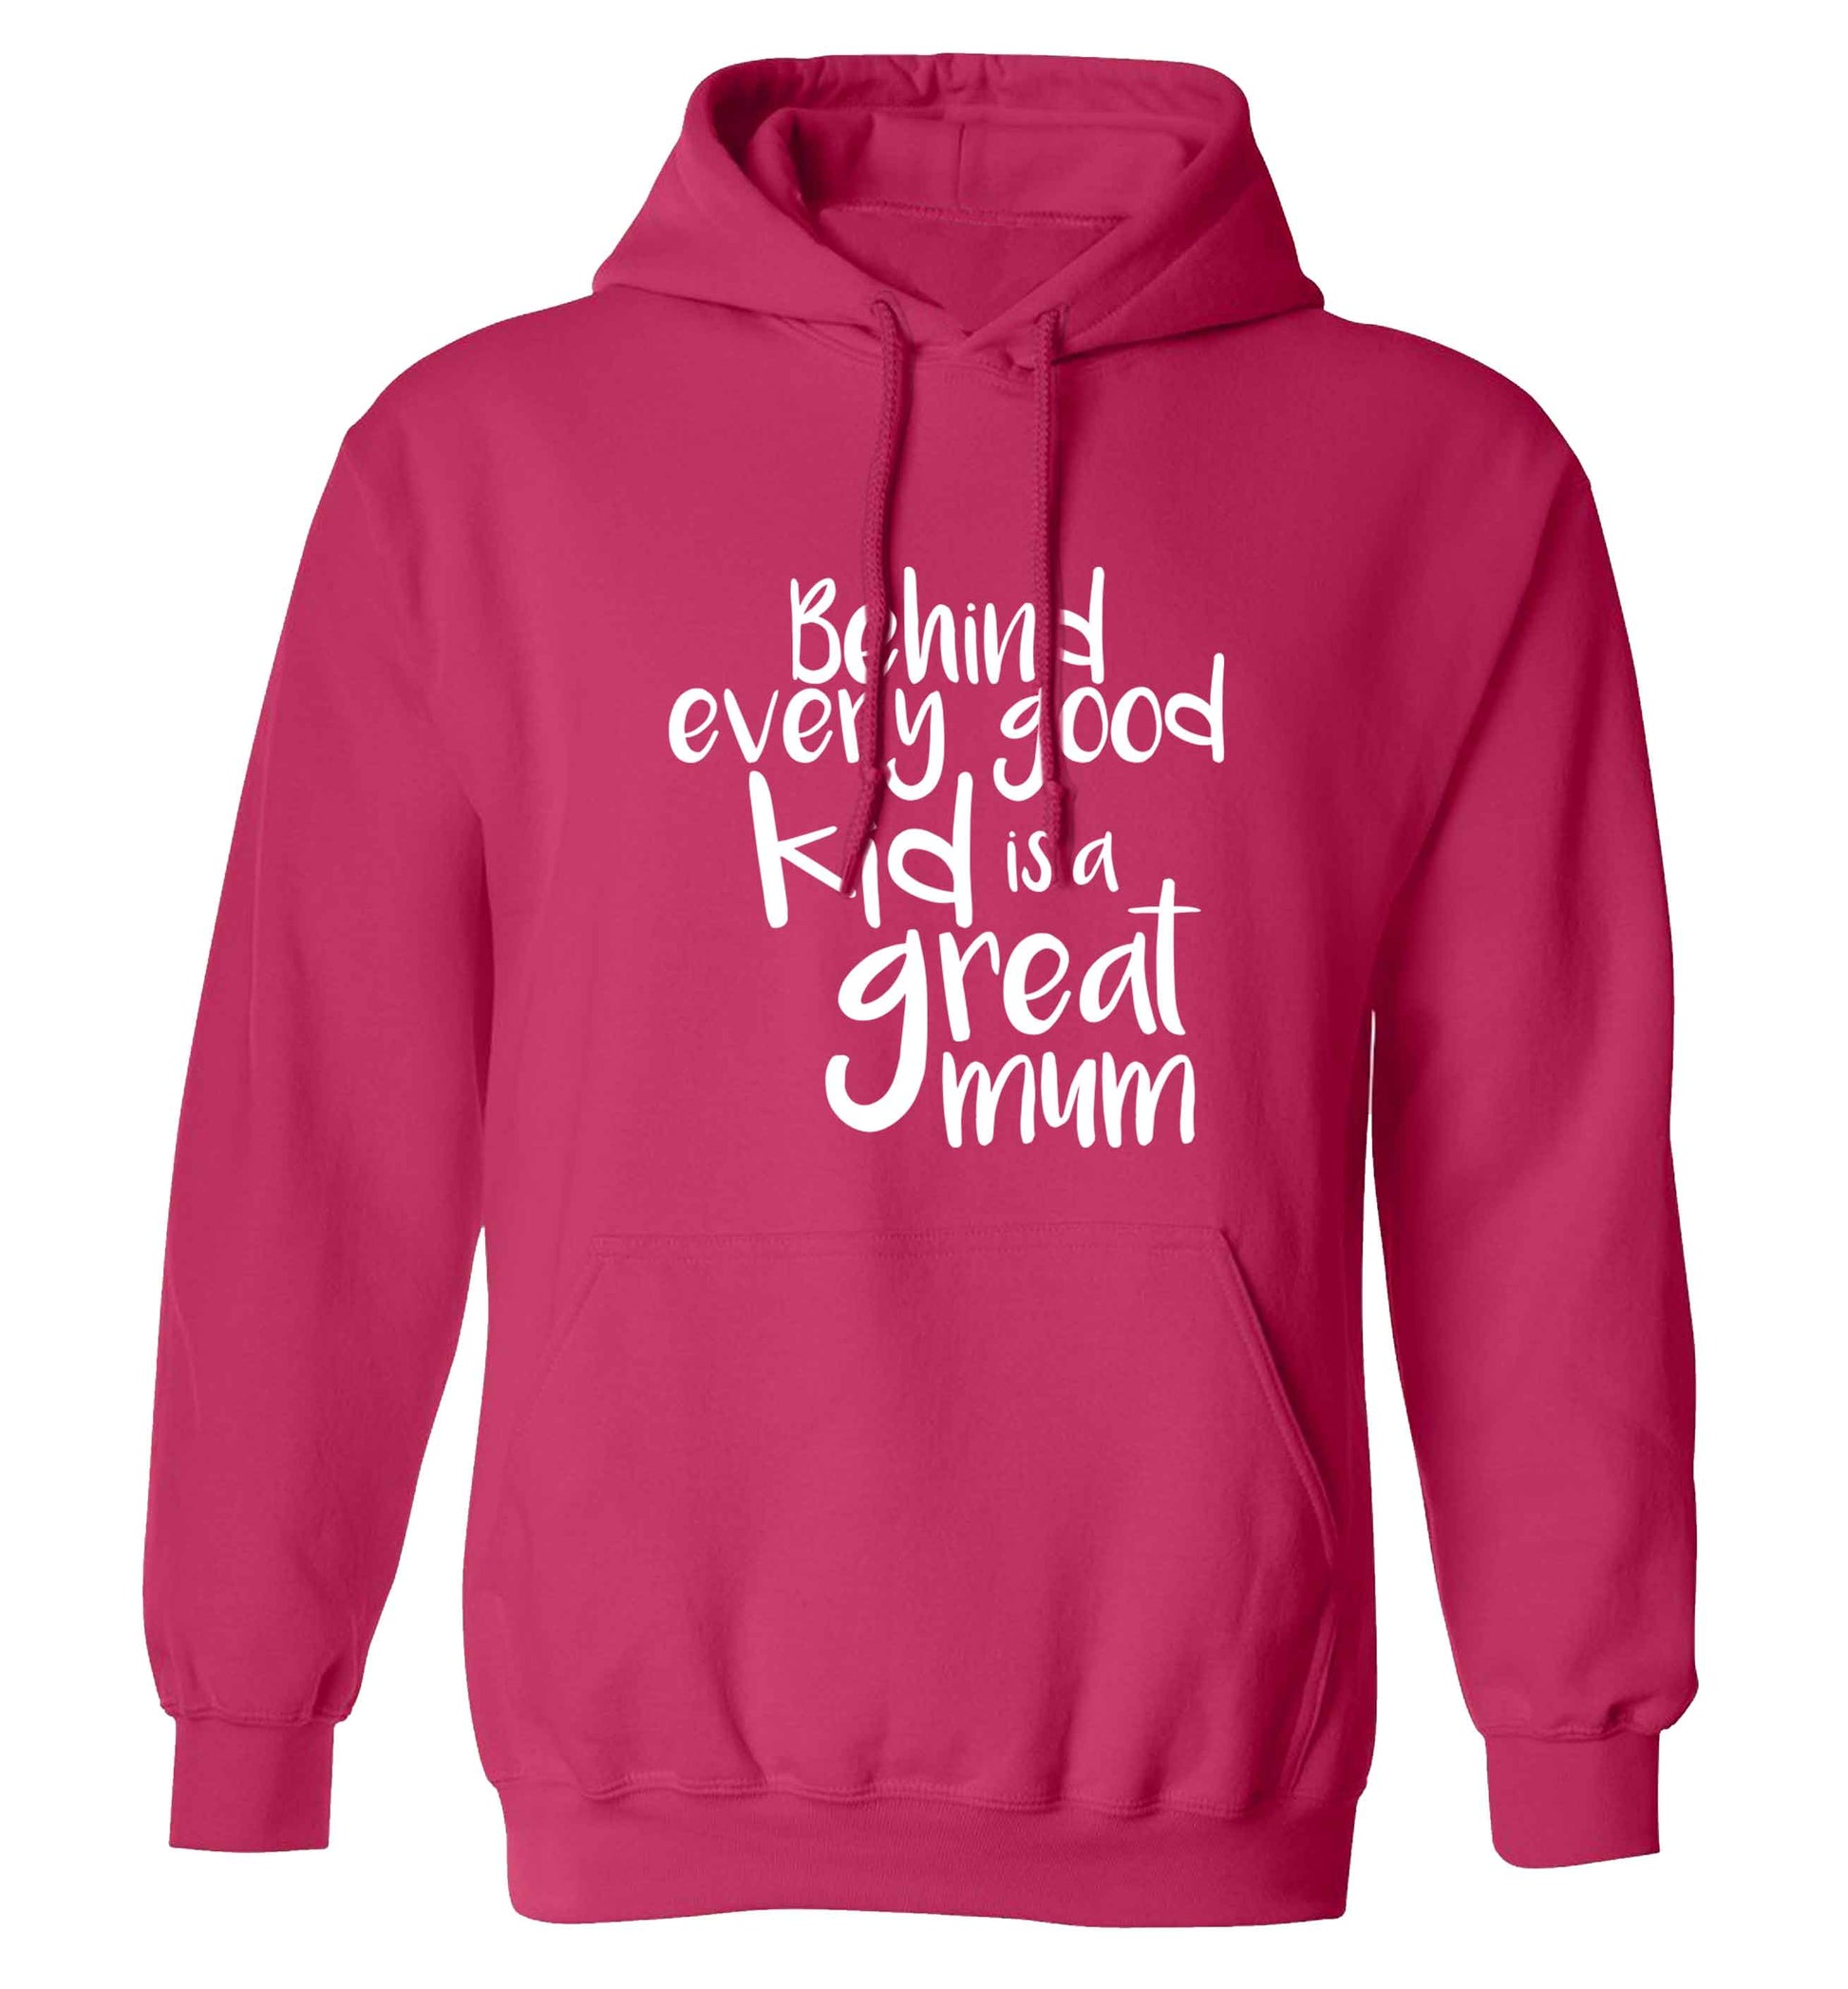 Behind every good kid is a great mum adults unisex pink hoodie 2XL